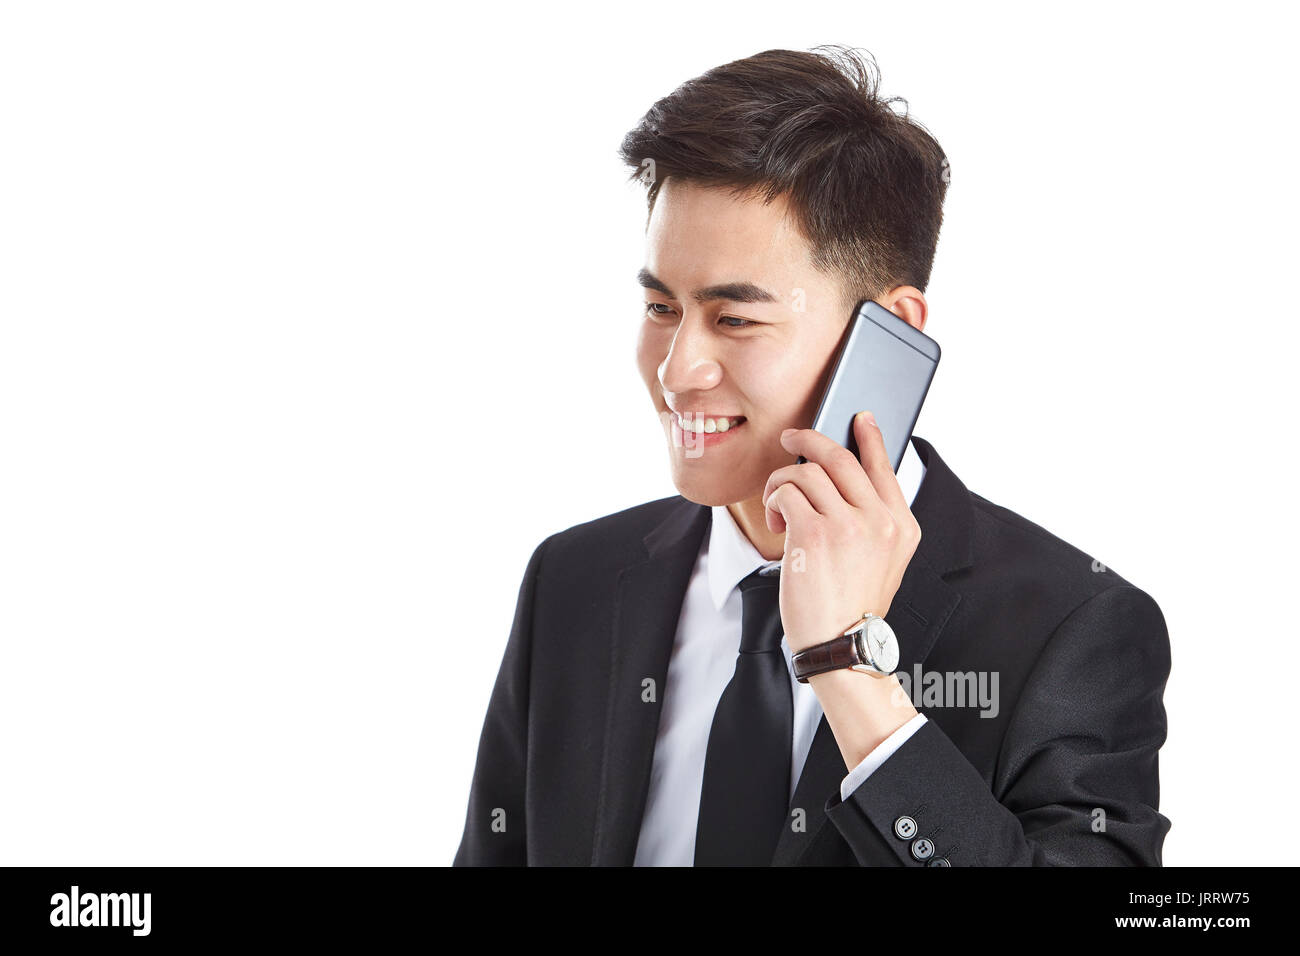 Young Asian business man talking on cellphone, isolé sur fond blanc. Banque D'Images